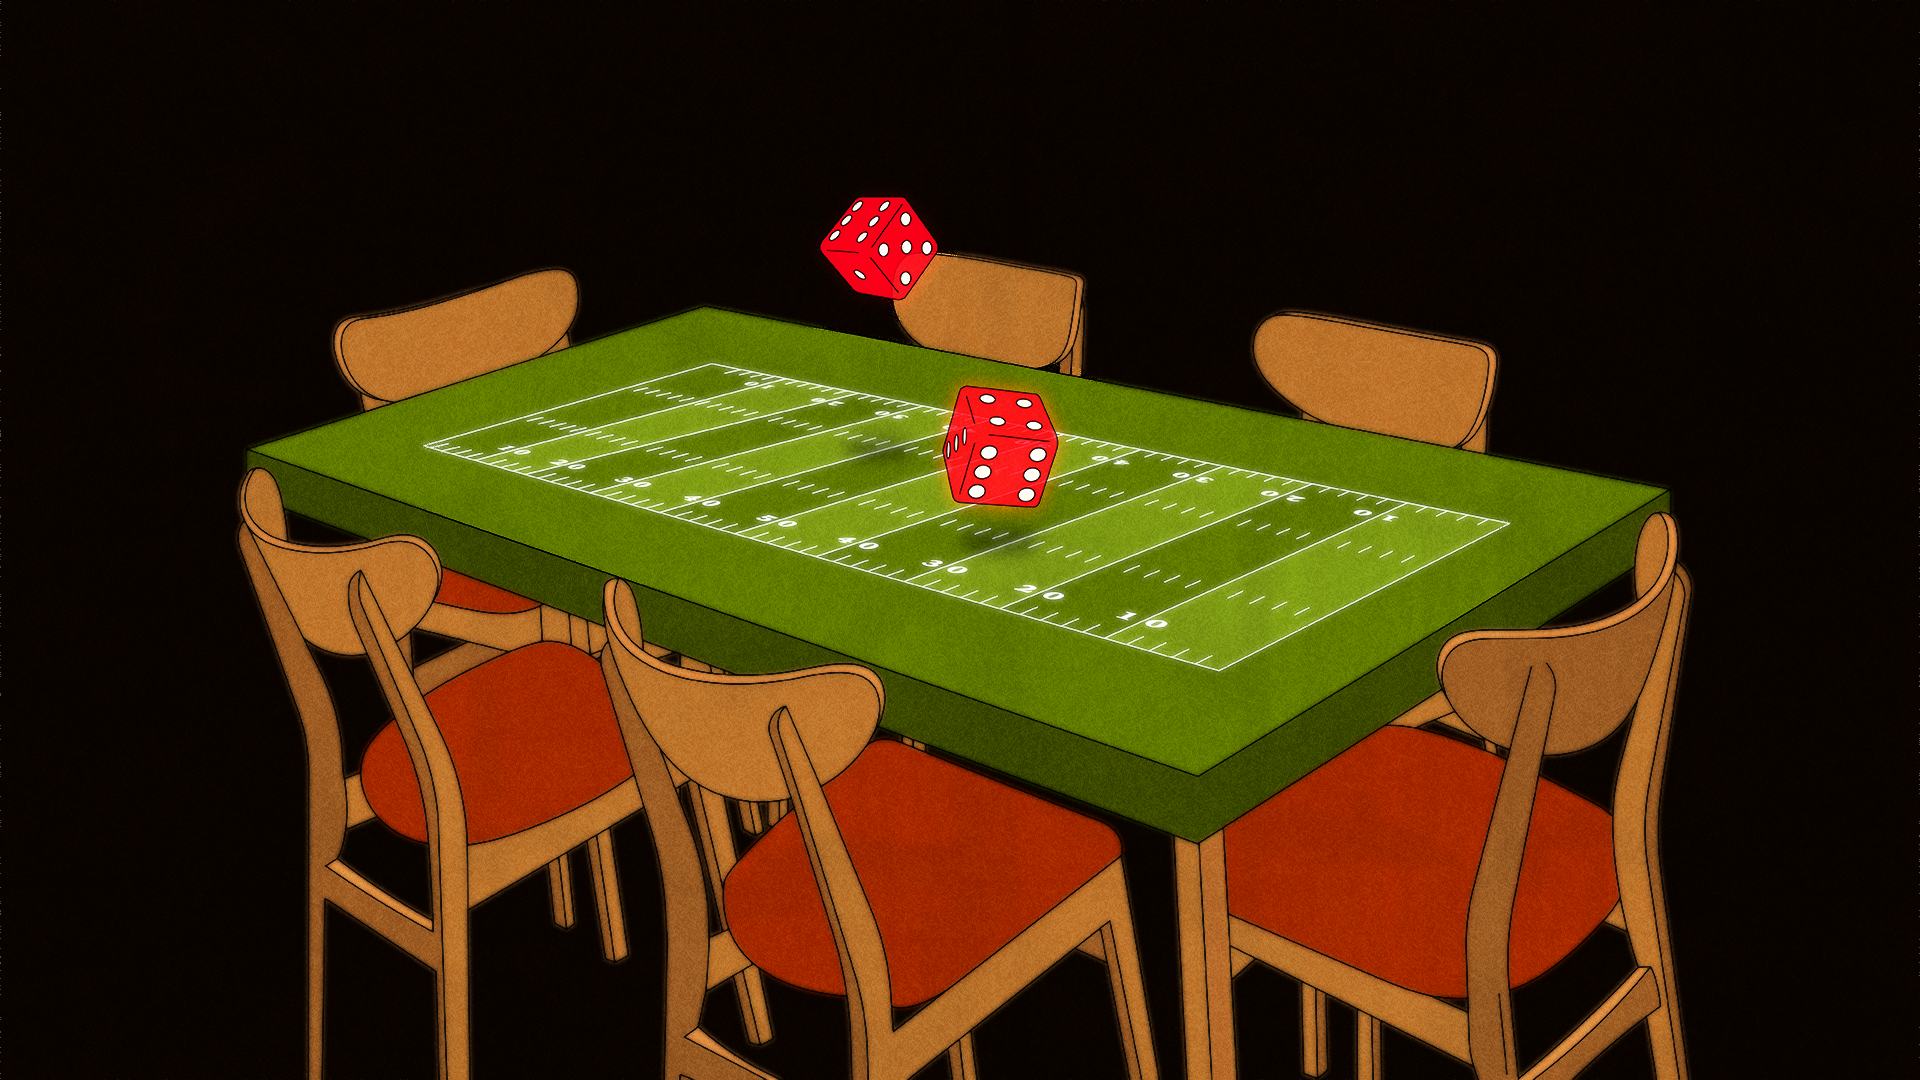 Empty chairs surround a table with a football field on its top. Two oversized red dice are being rolled in the middle. The background is starkly black.